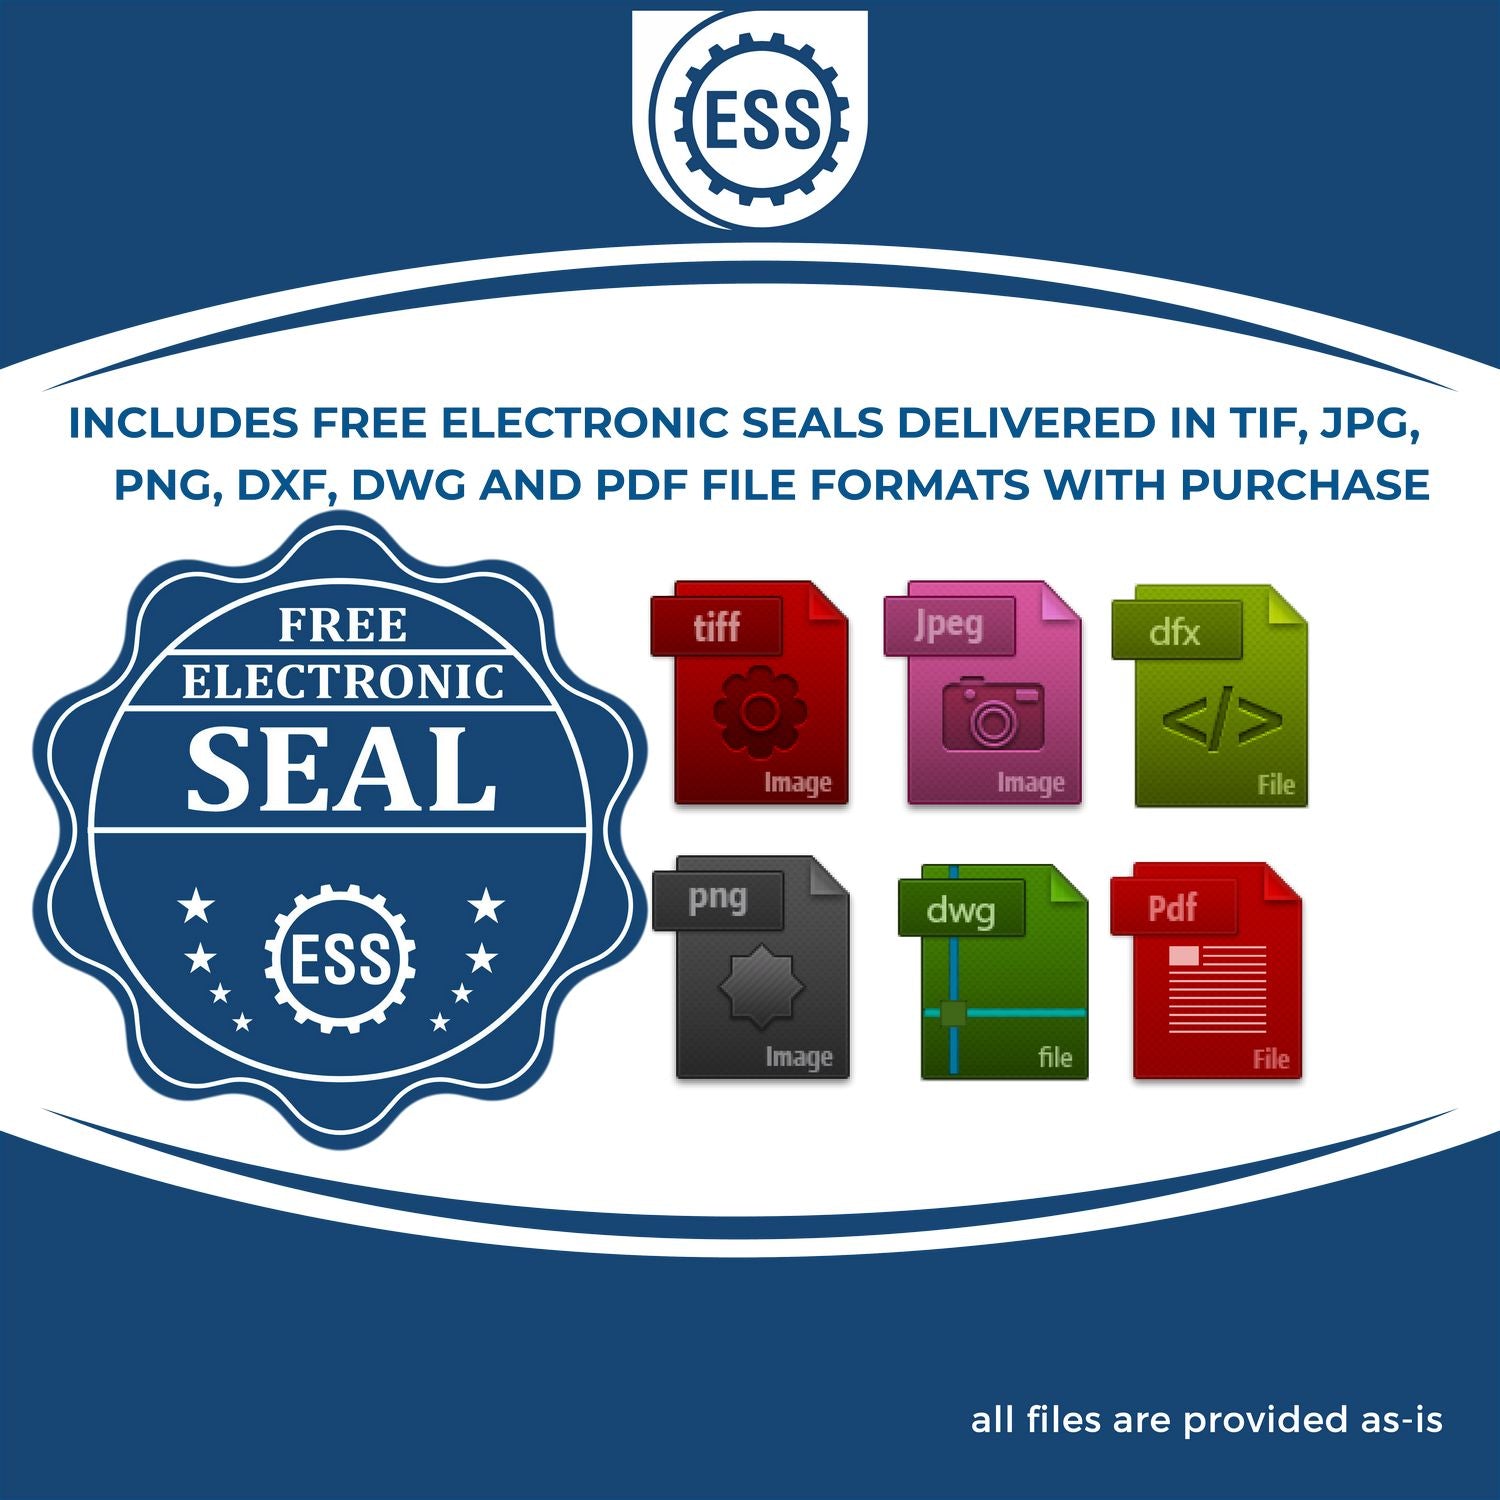 An infographic for the free electronic seal for the Slim Pre-Inked State Seal Notary Stamp for South Carolina illustrating the different file type icons such as DXF, DWG, TIF, JPG and PNG.